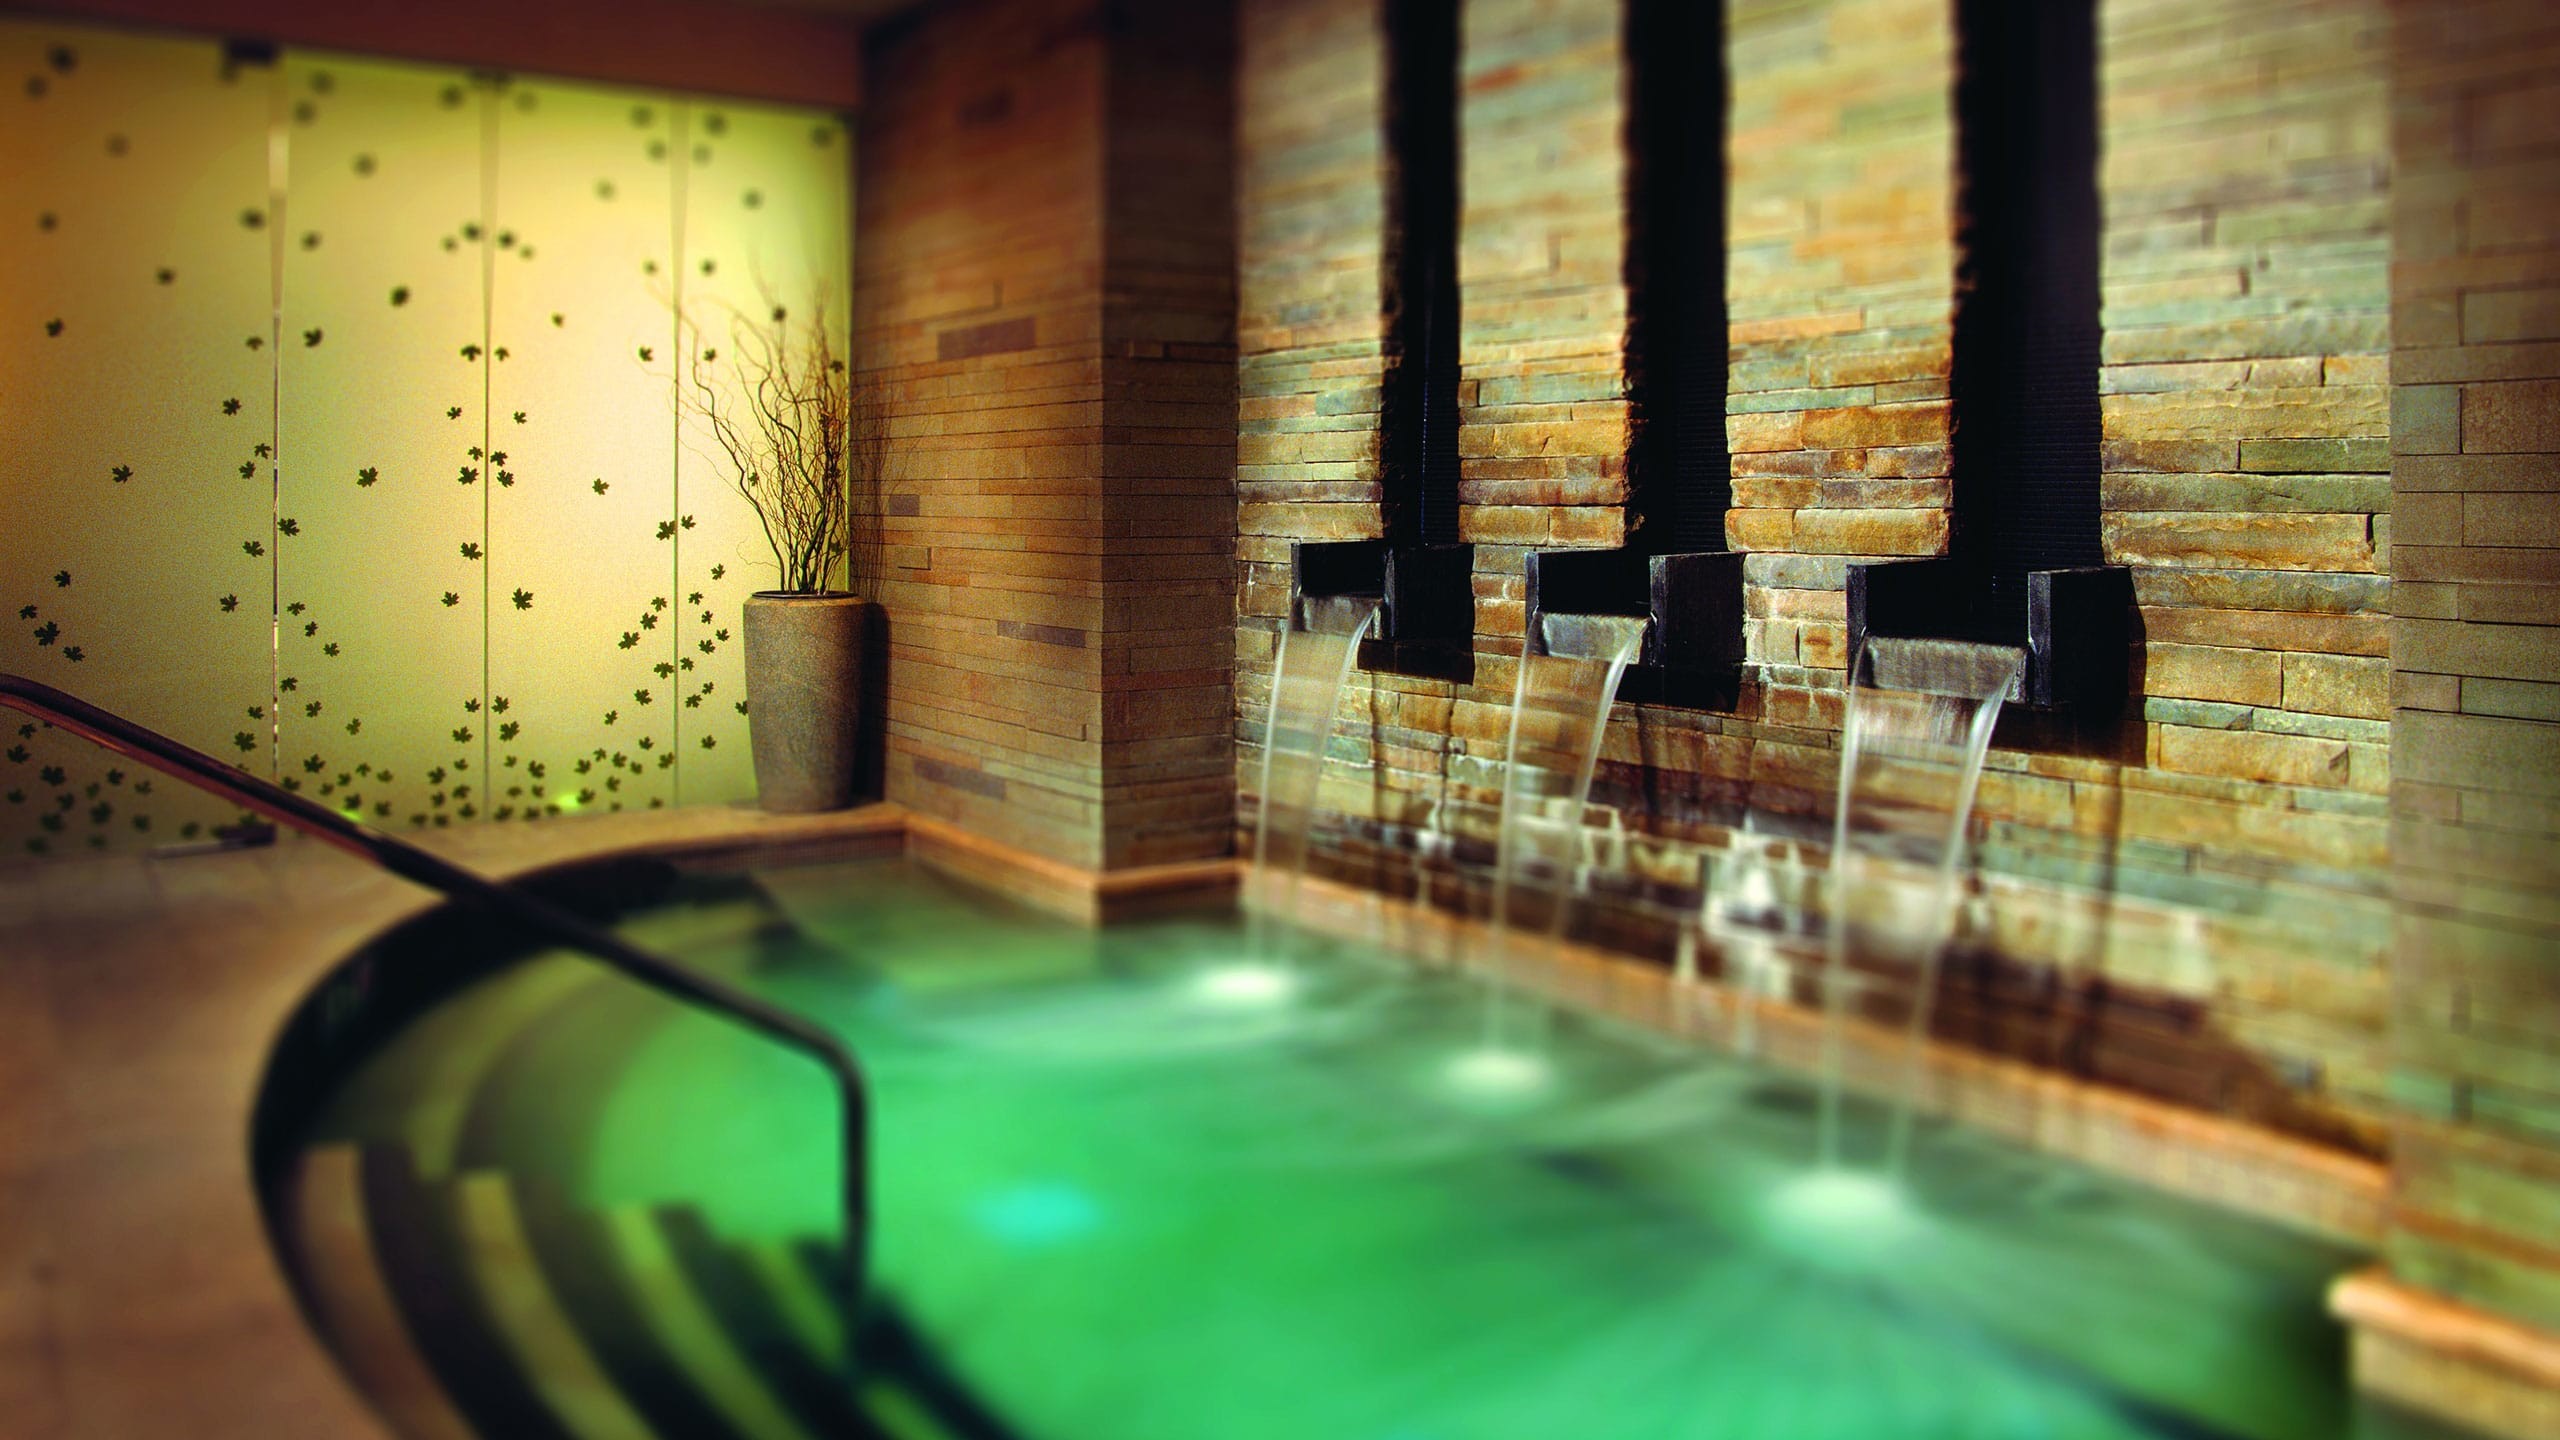 2560x1440 About Allegria Spa at Park Hyatt Beaver Creek Resort and Spa